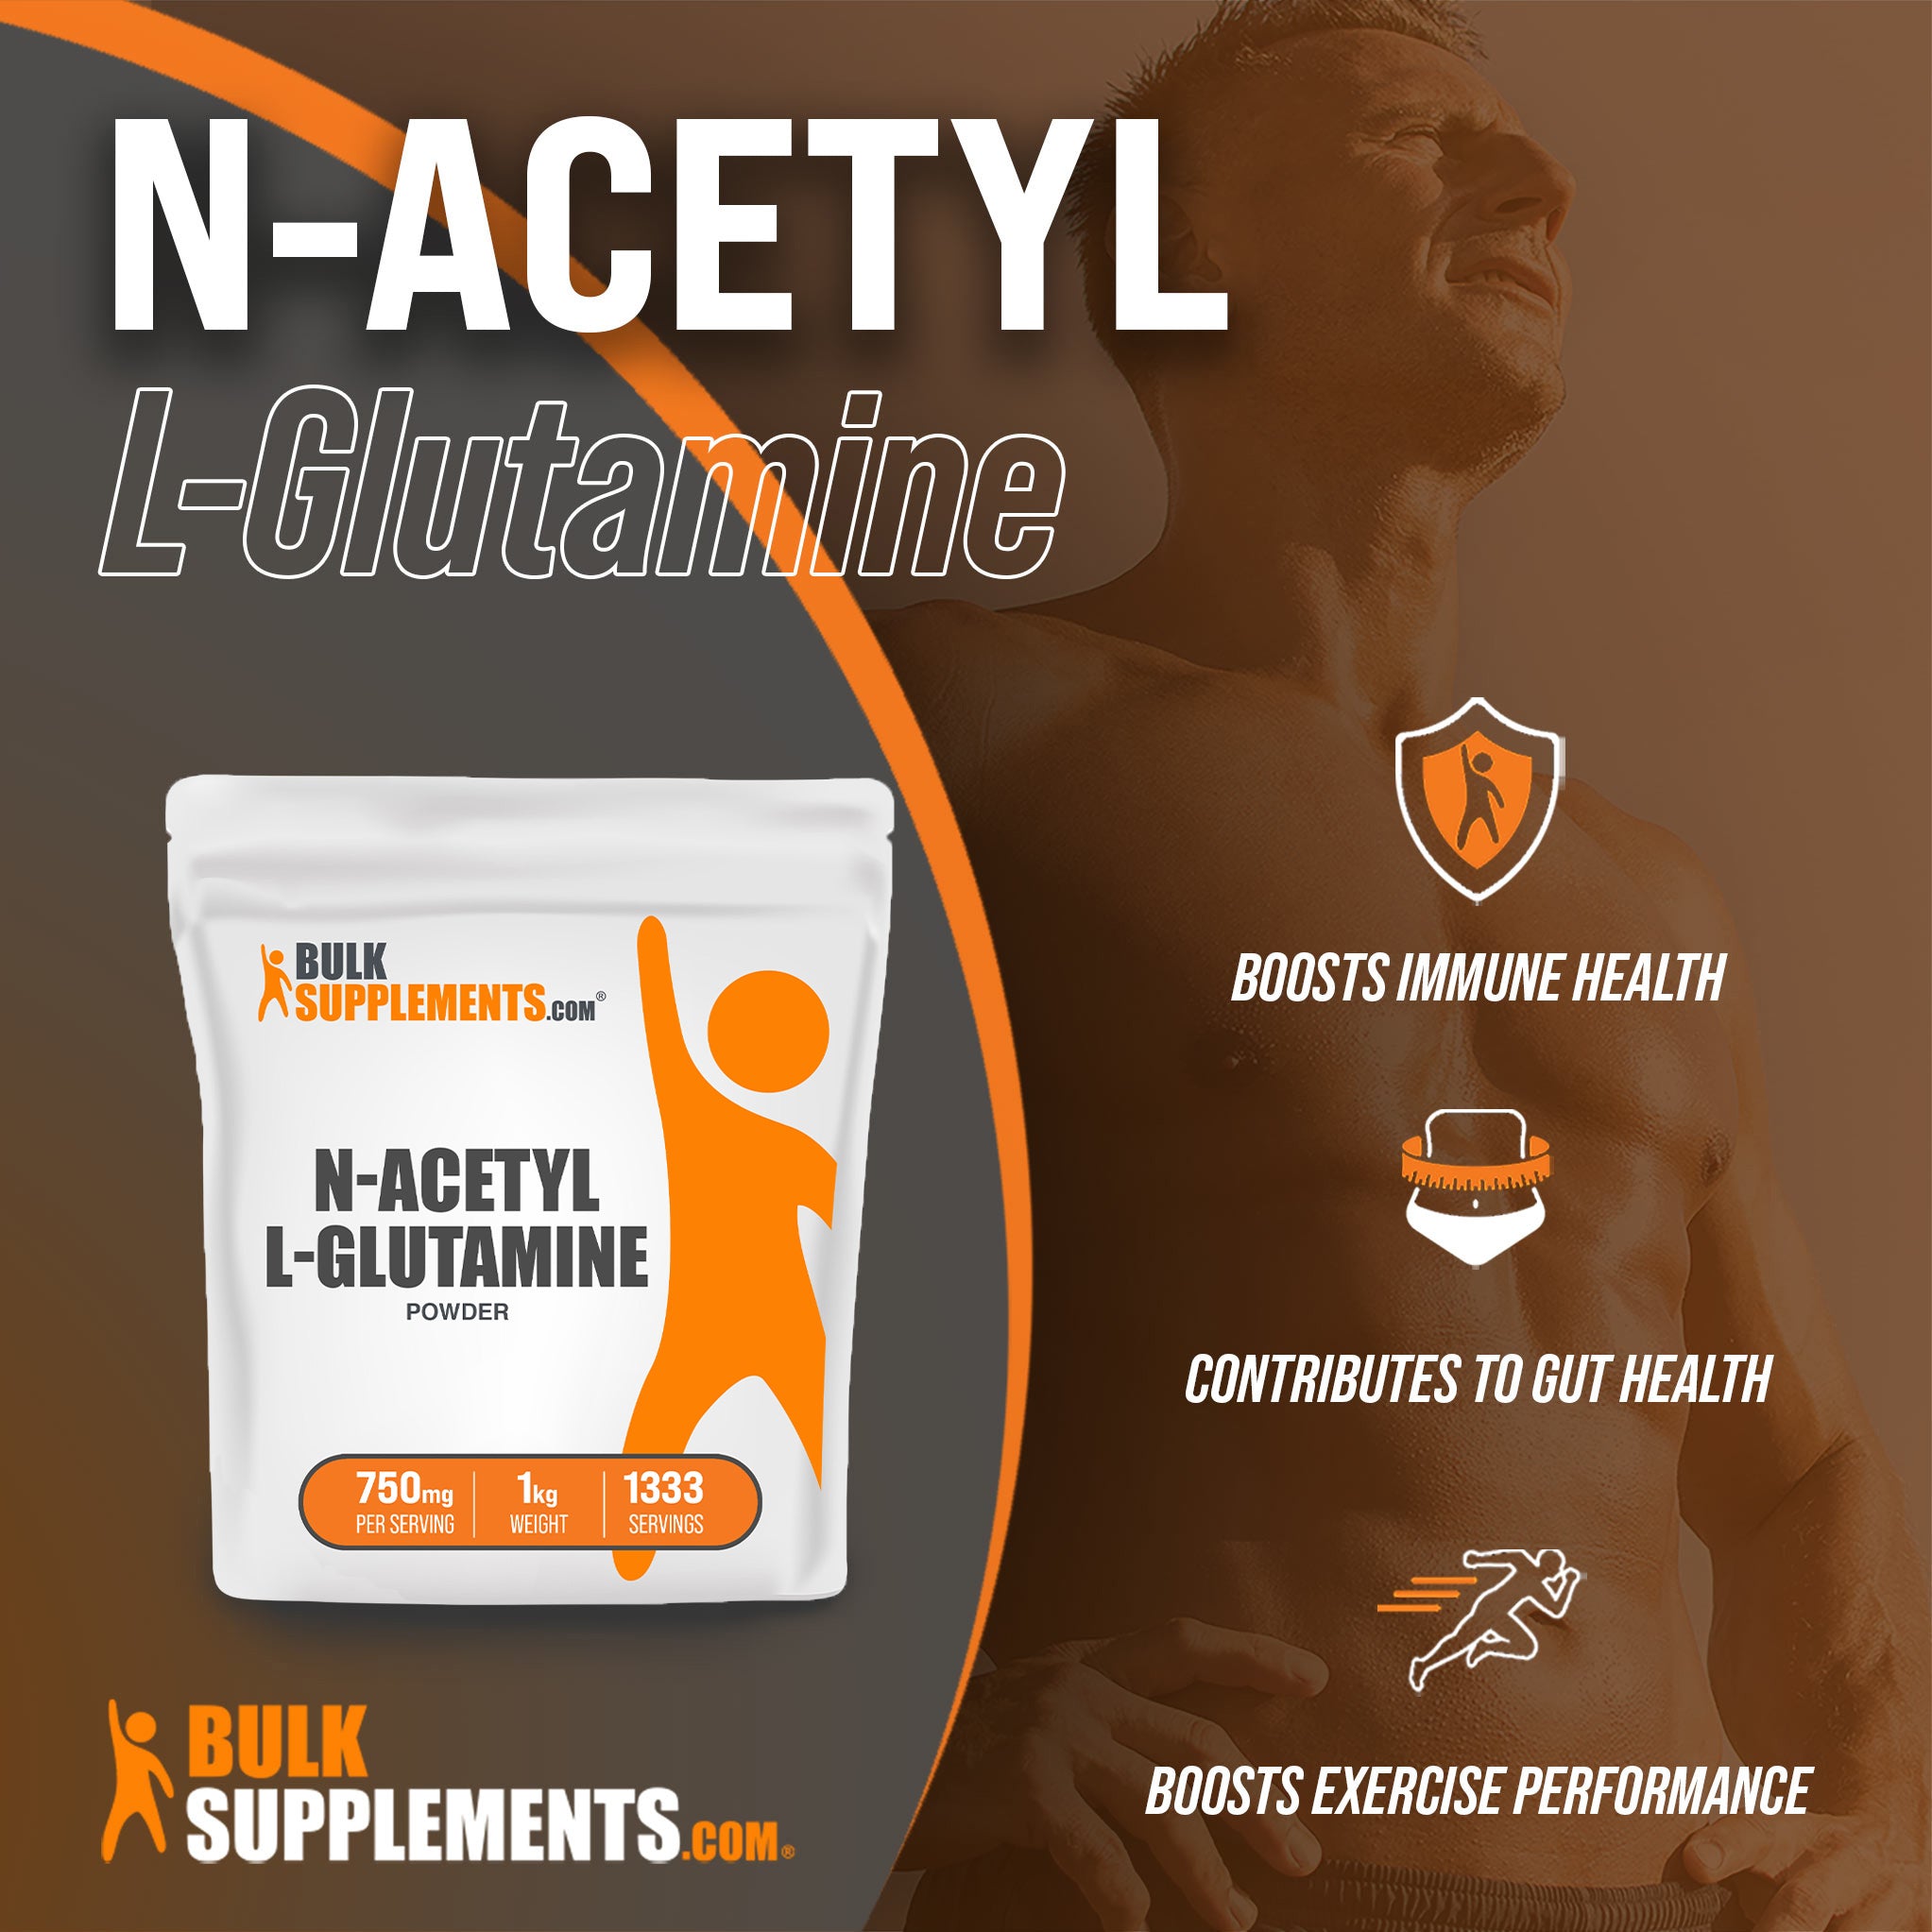 Benefits of N-Acetyl L-Glutamine: boosts immune health, contributes to gut health, boosts exercise performance